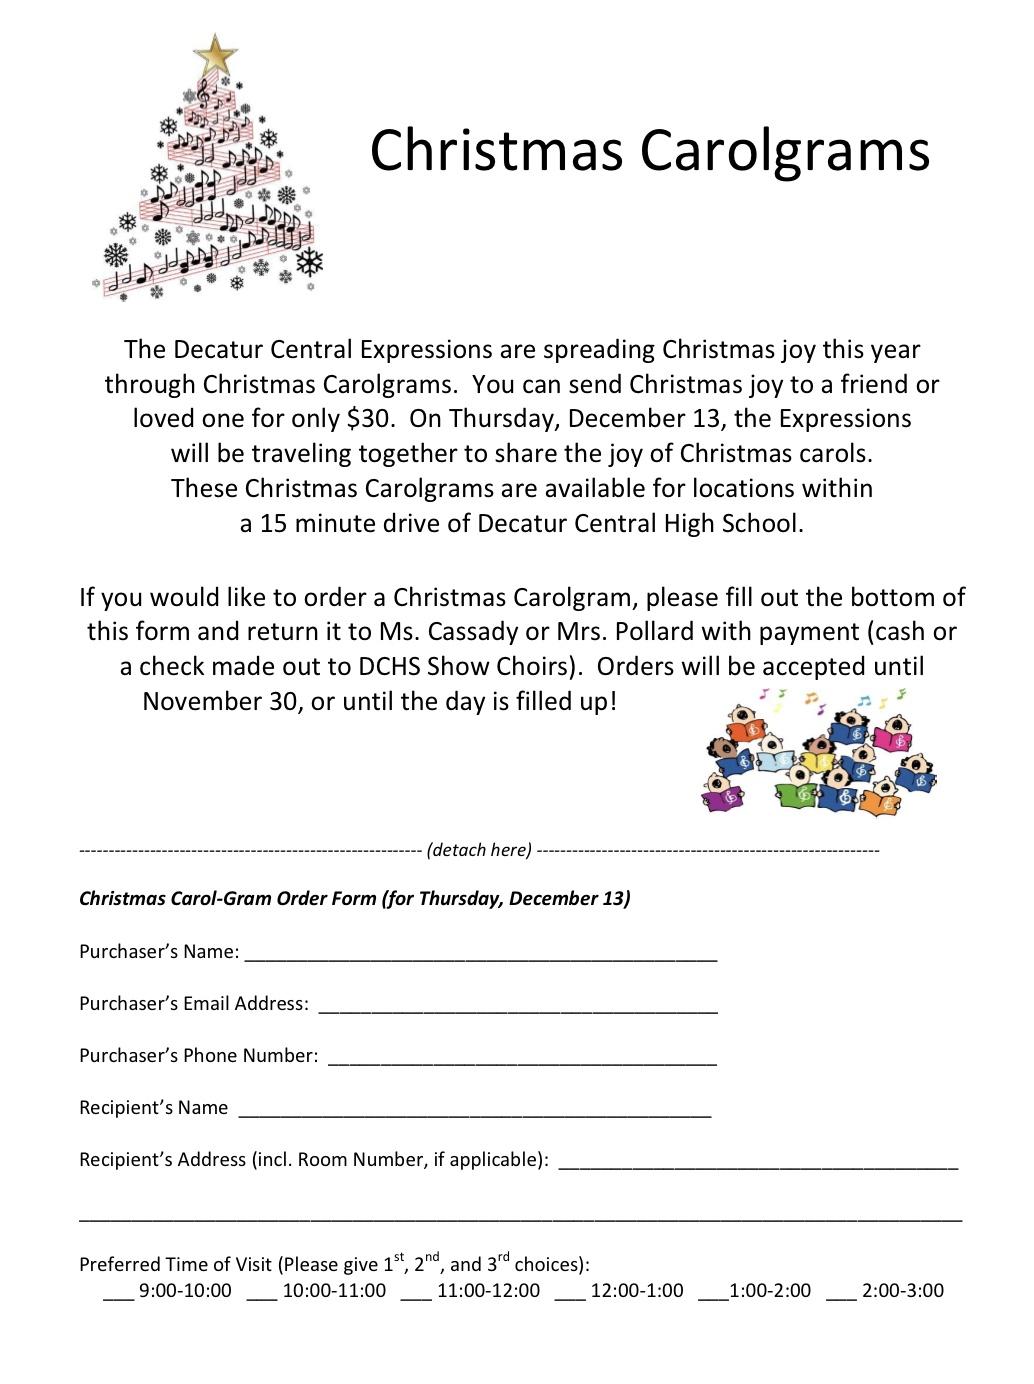 DCHS Expressions Show Choir - Christmas Carolgrams, Page 1